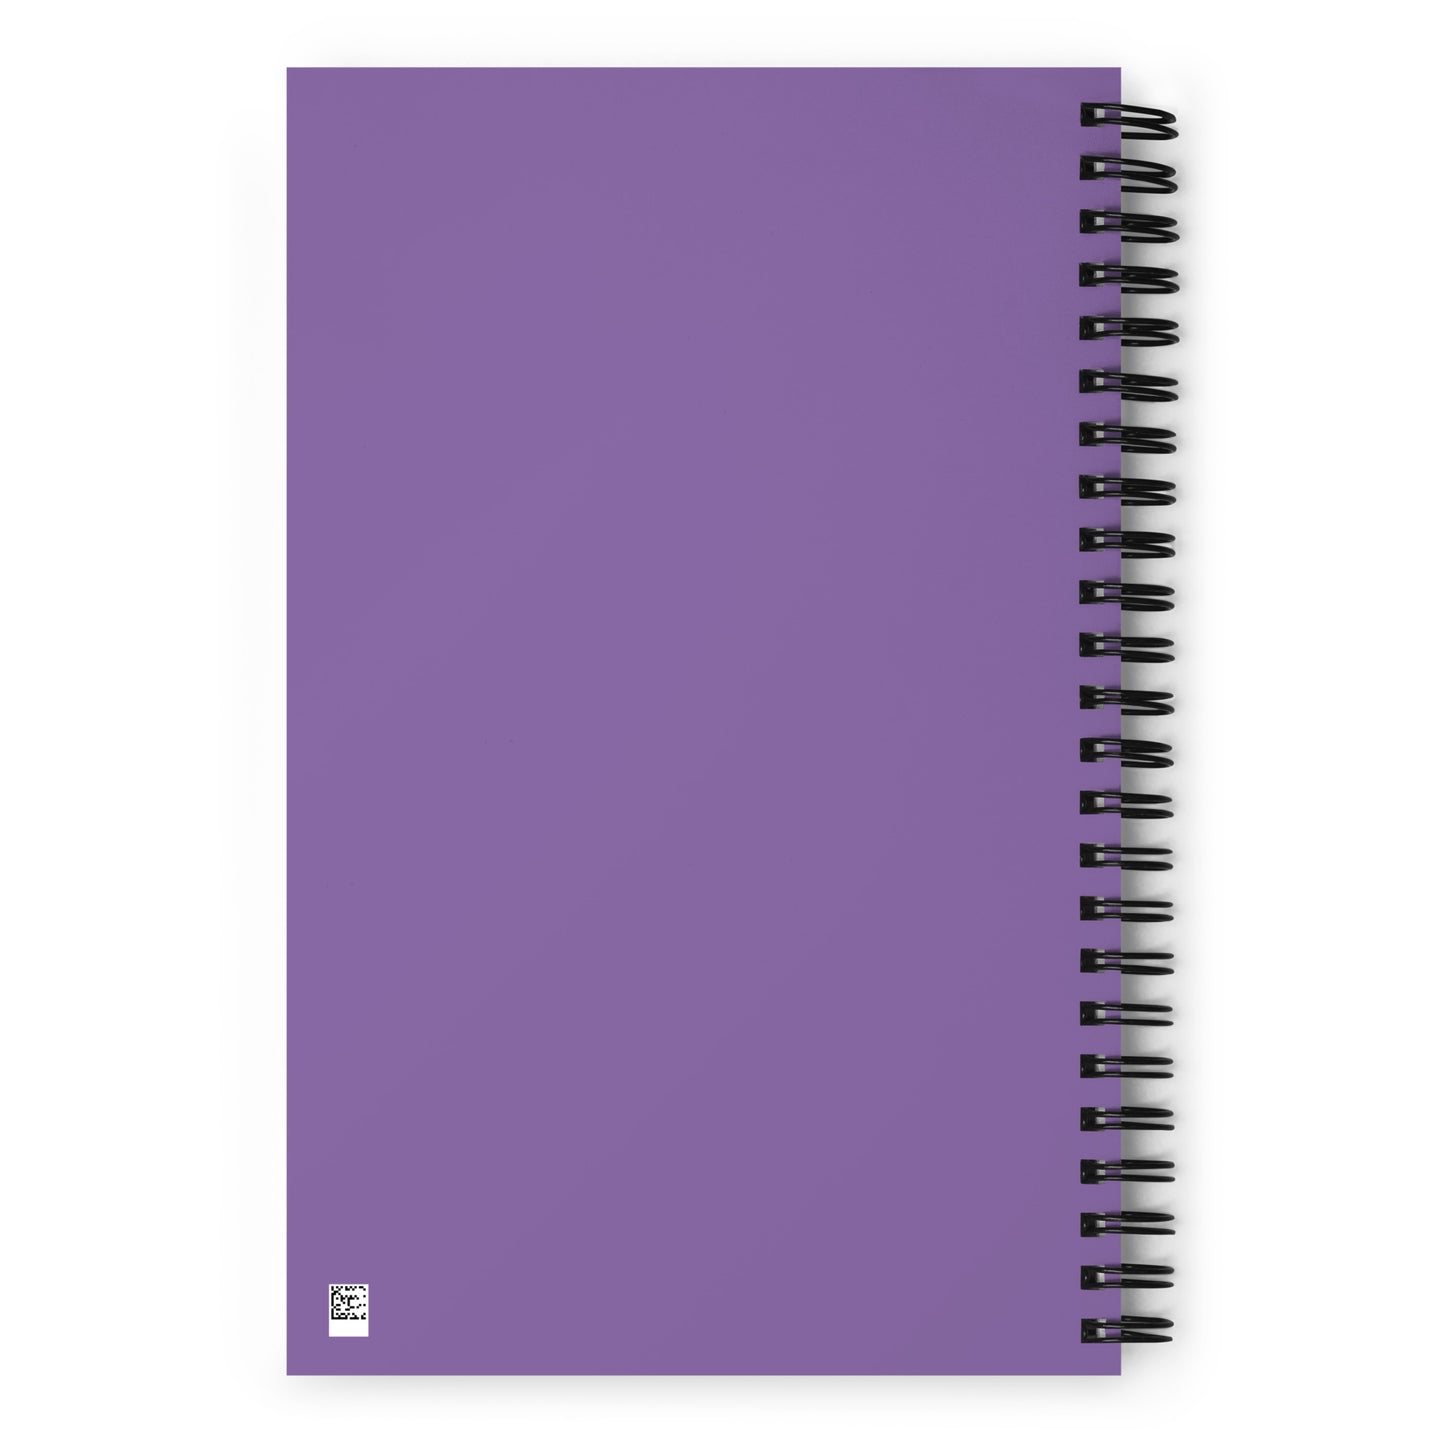 Blossoming Tranquility Spiral notebook